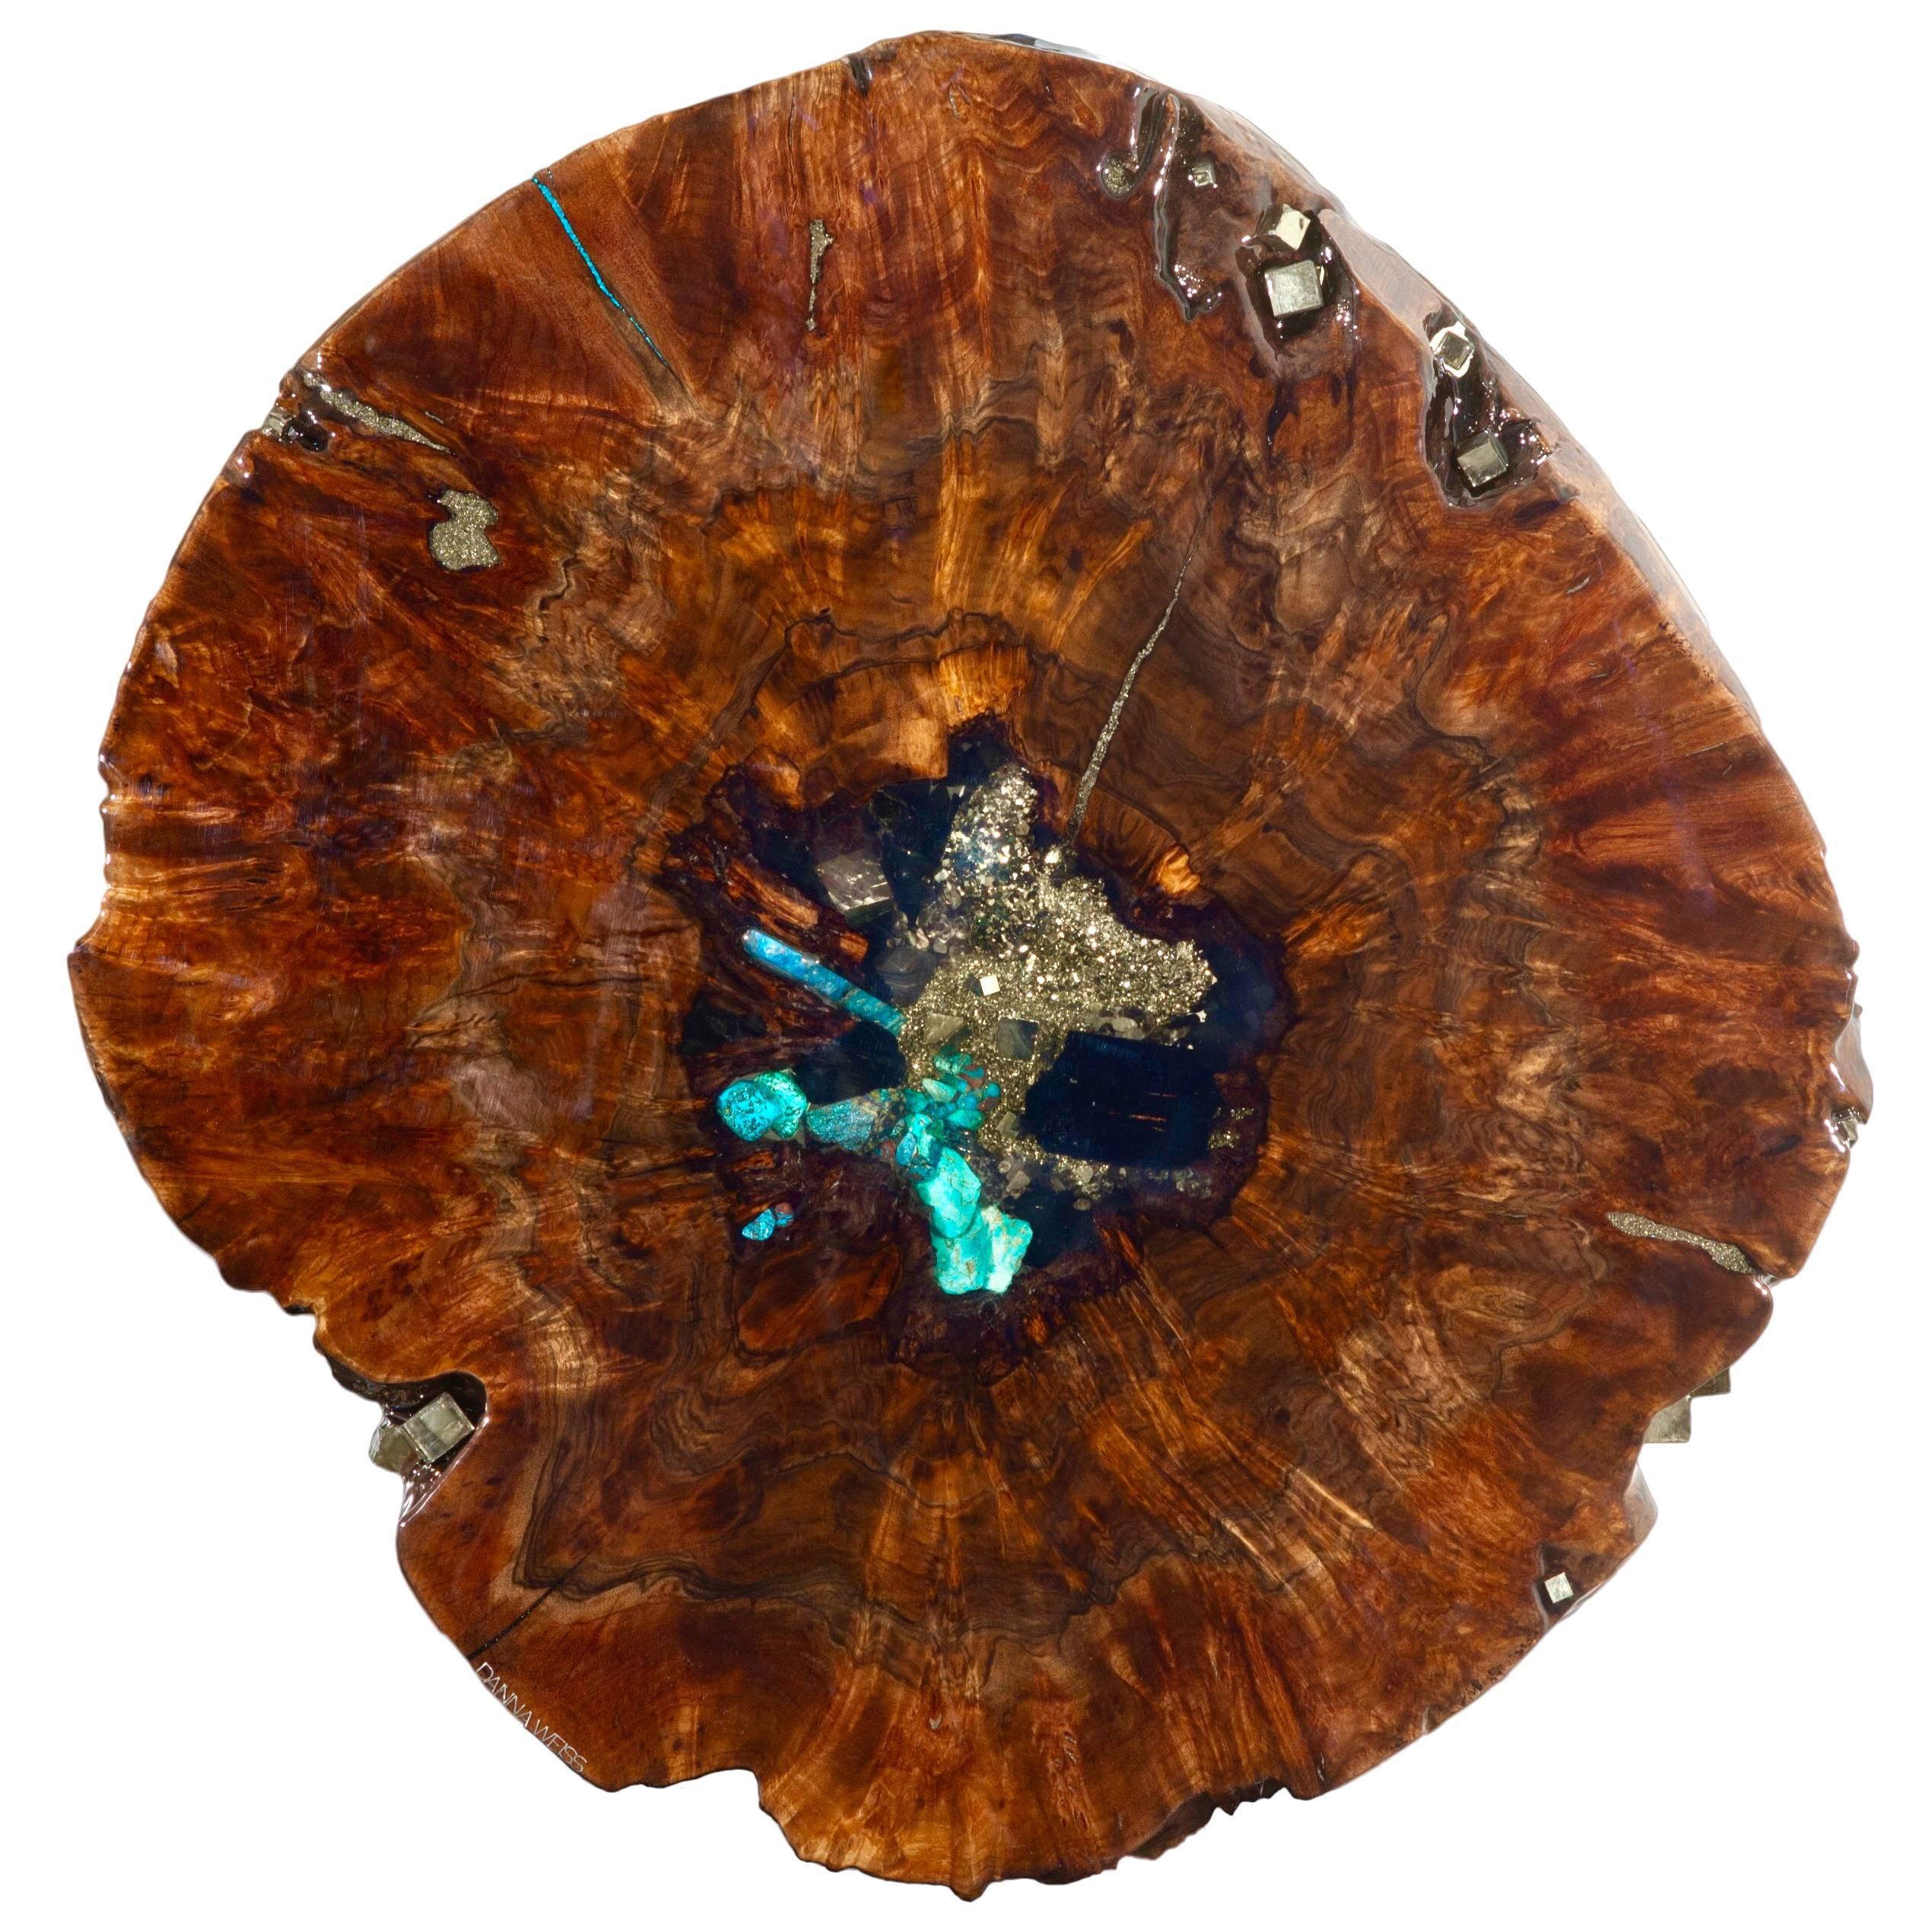 Walnut wood sculpture in resin with gemstone inlay